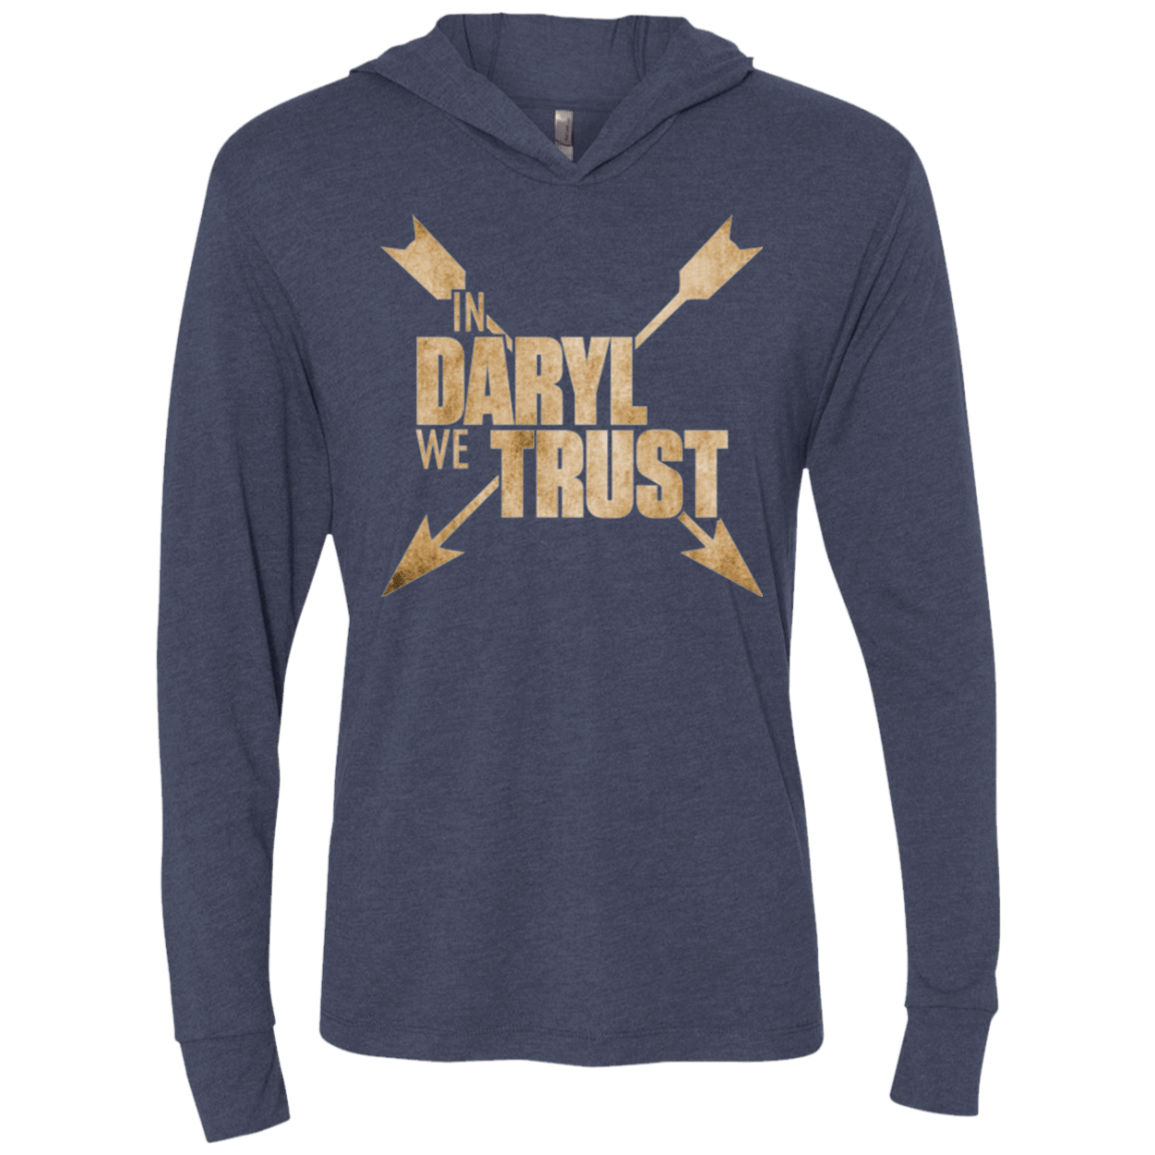 T-Shirts Vintage Navy / X-Small In Daryl We Trust Triblend Long Sleeve Hoodie Tee